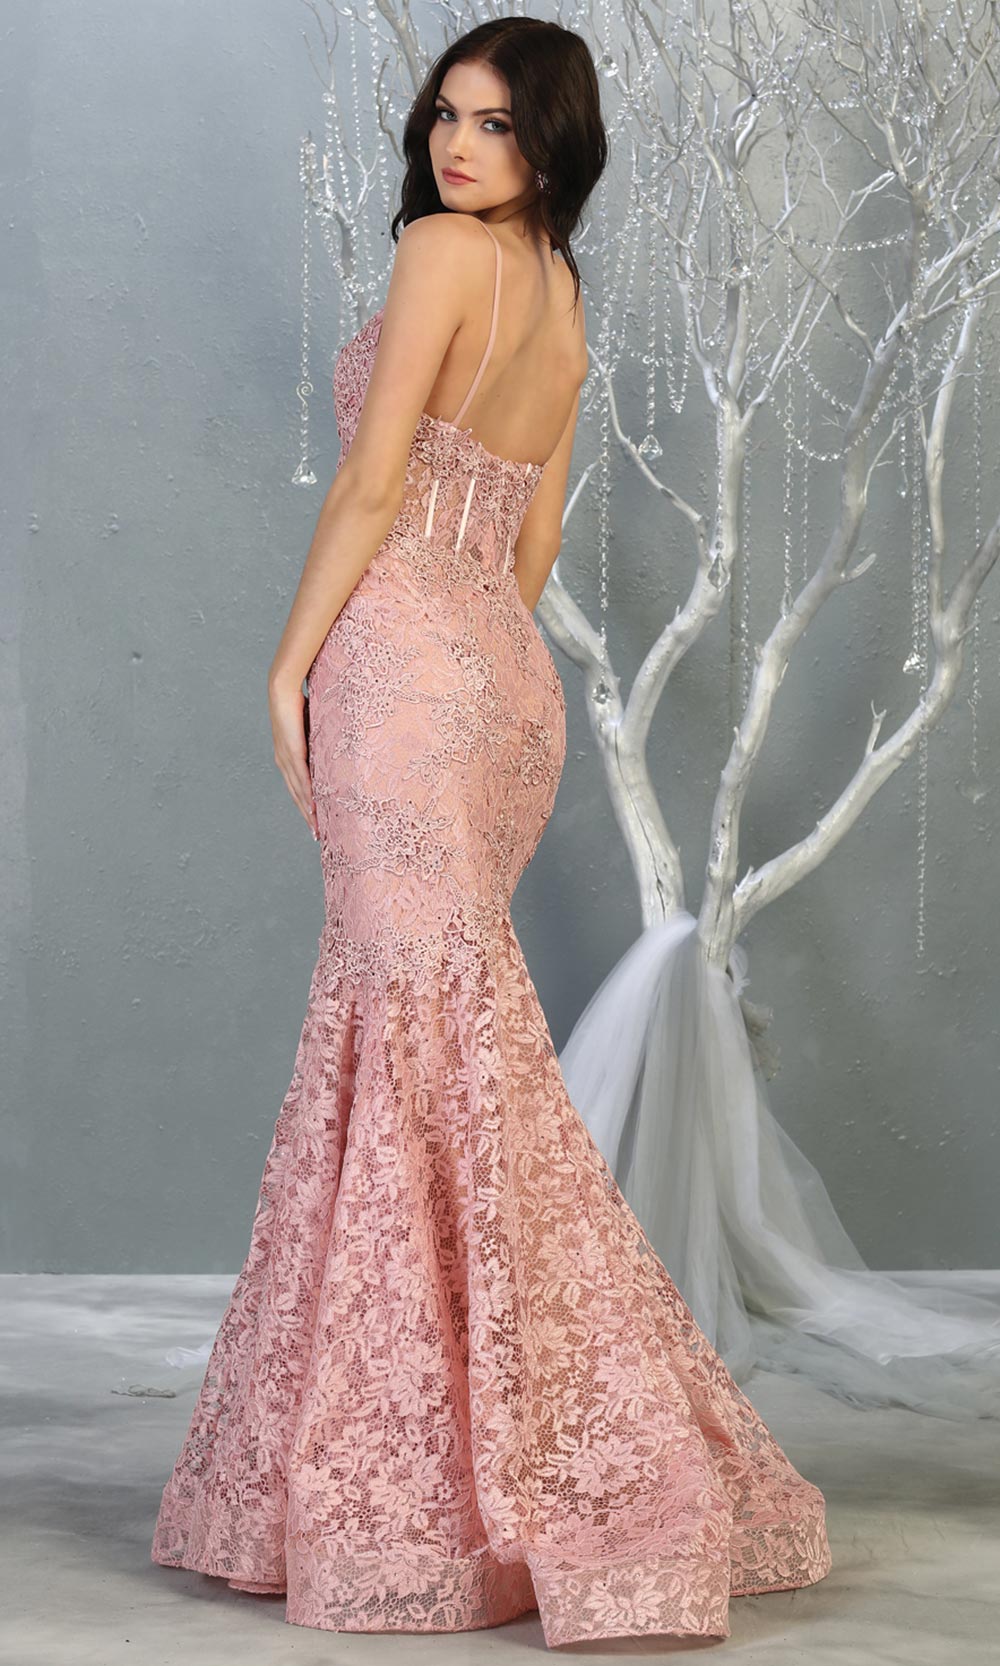 Mayqueen RQ7865 long dusty rose v neck evening mermaid dress w/straps. Full length dusty rose lace gown is perfect for  enagagement/e-shoot dress, formal wedding guest, evening party dress, prom, engagement, wedding reception. Plus sizes avail-b.jpg